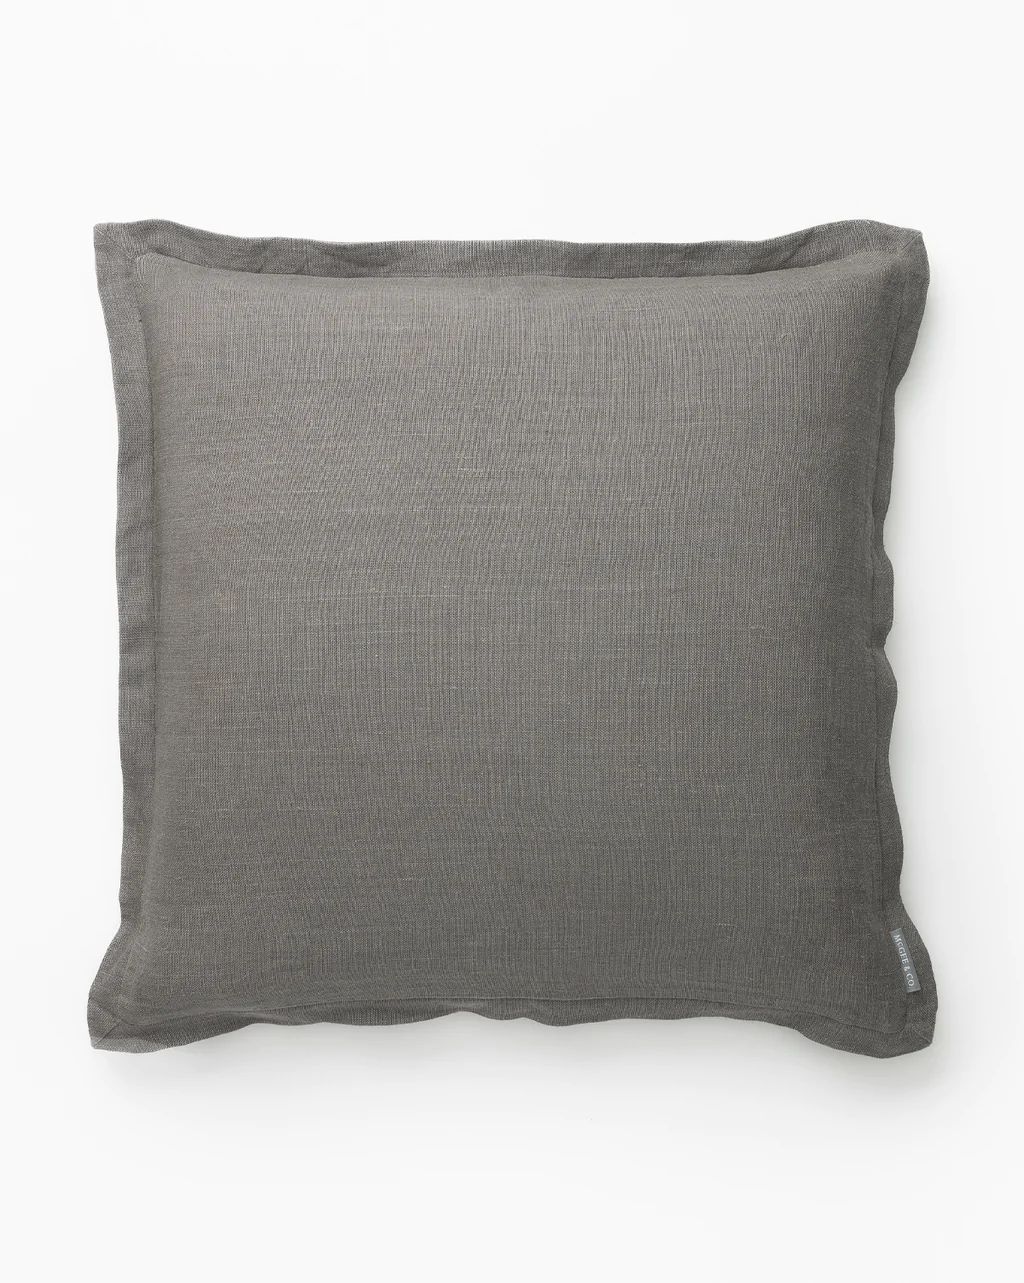 Liam Double Flange Pillow Cover | McGee & Co.